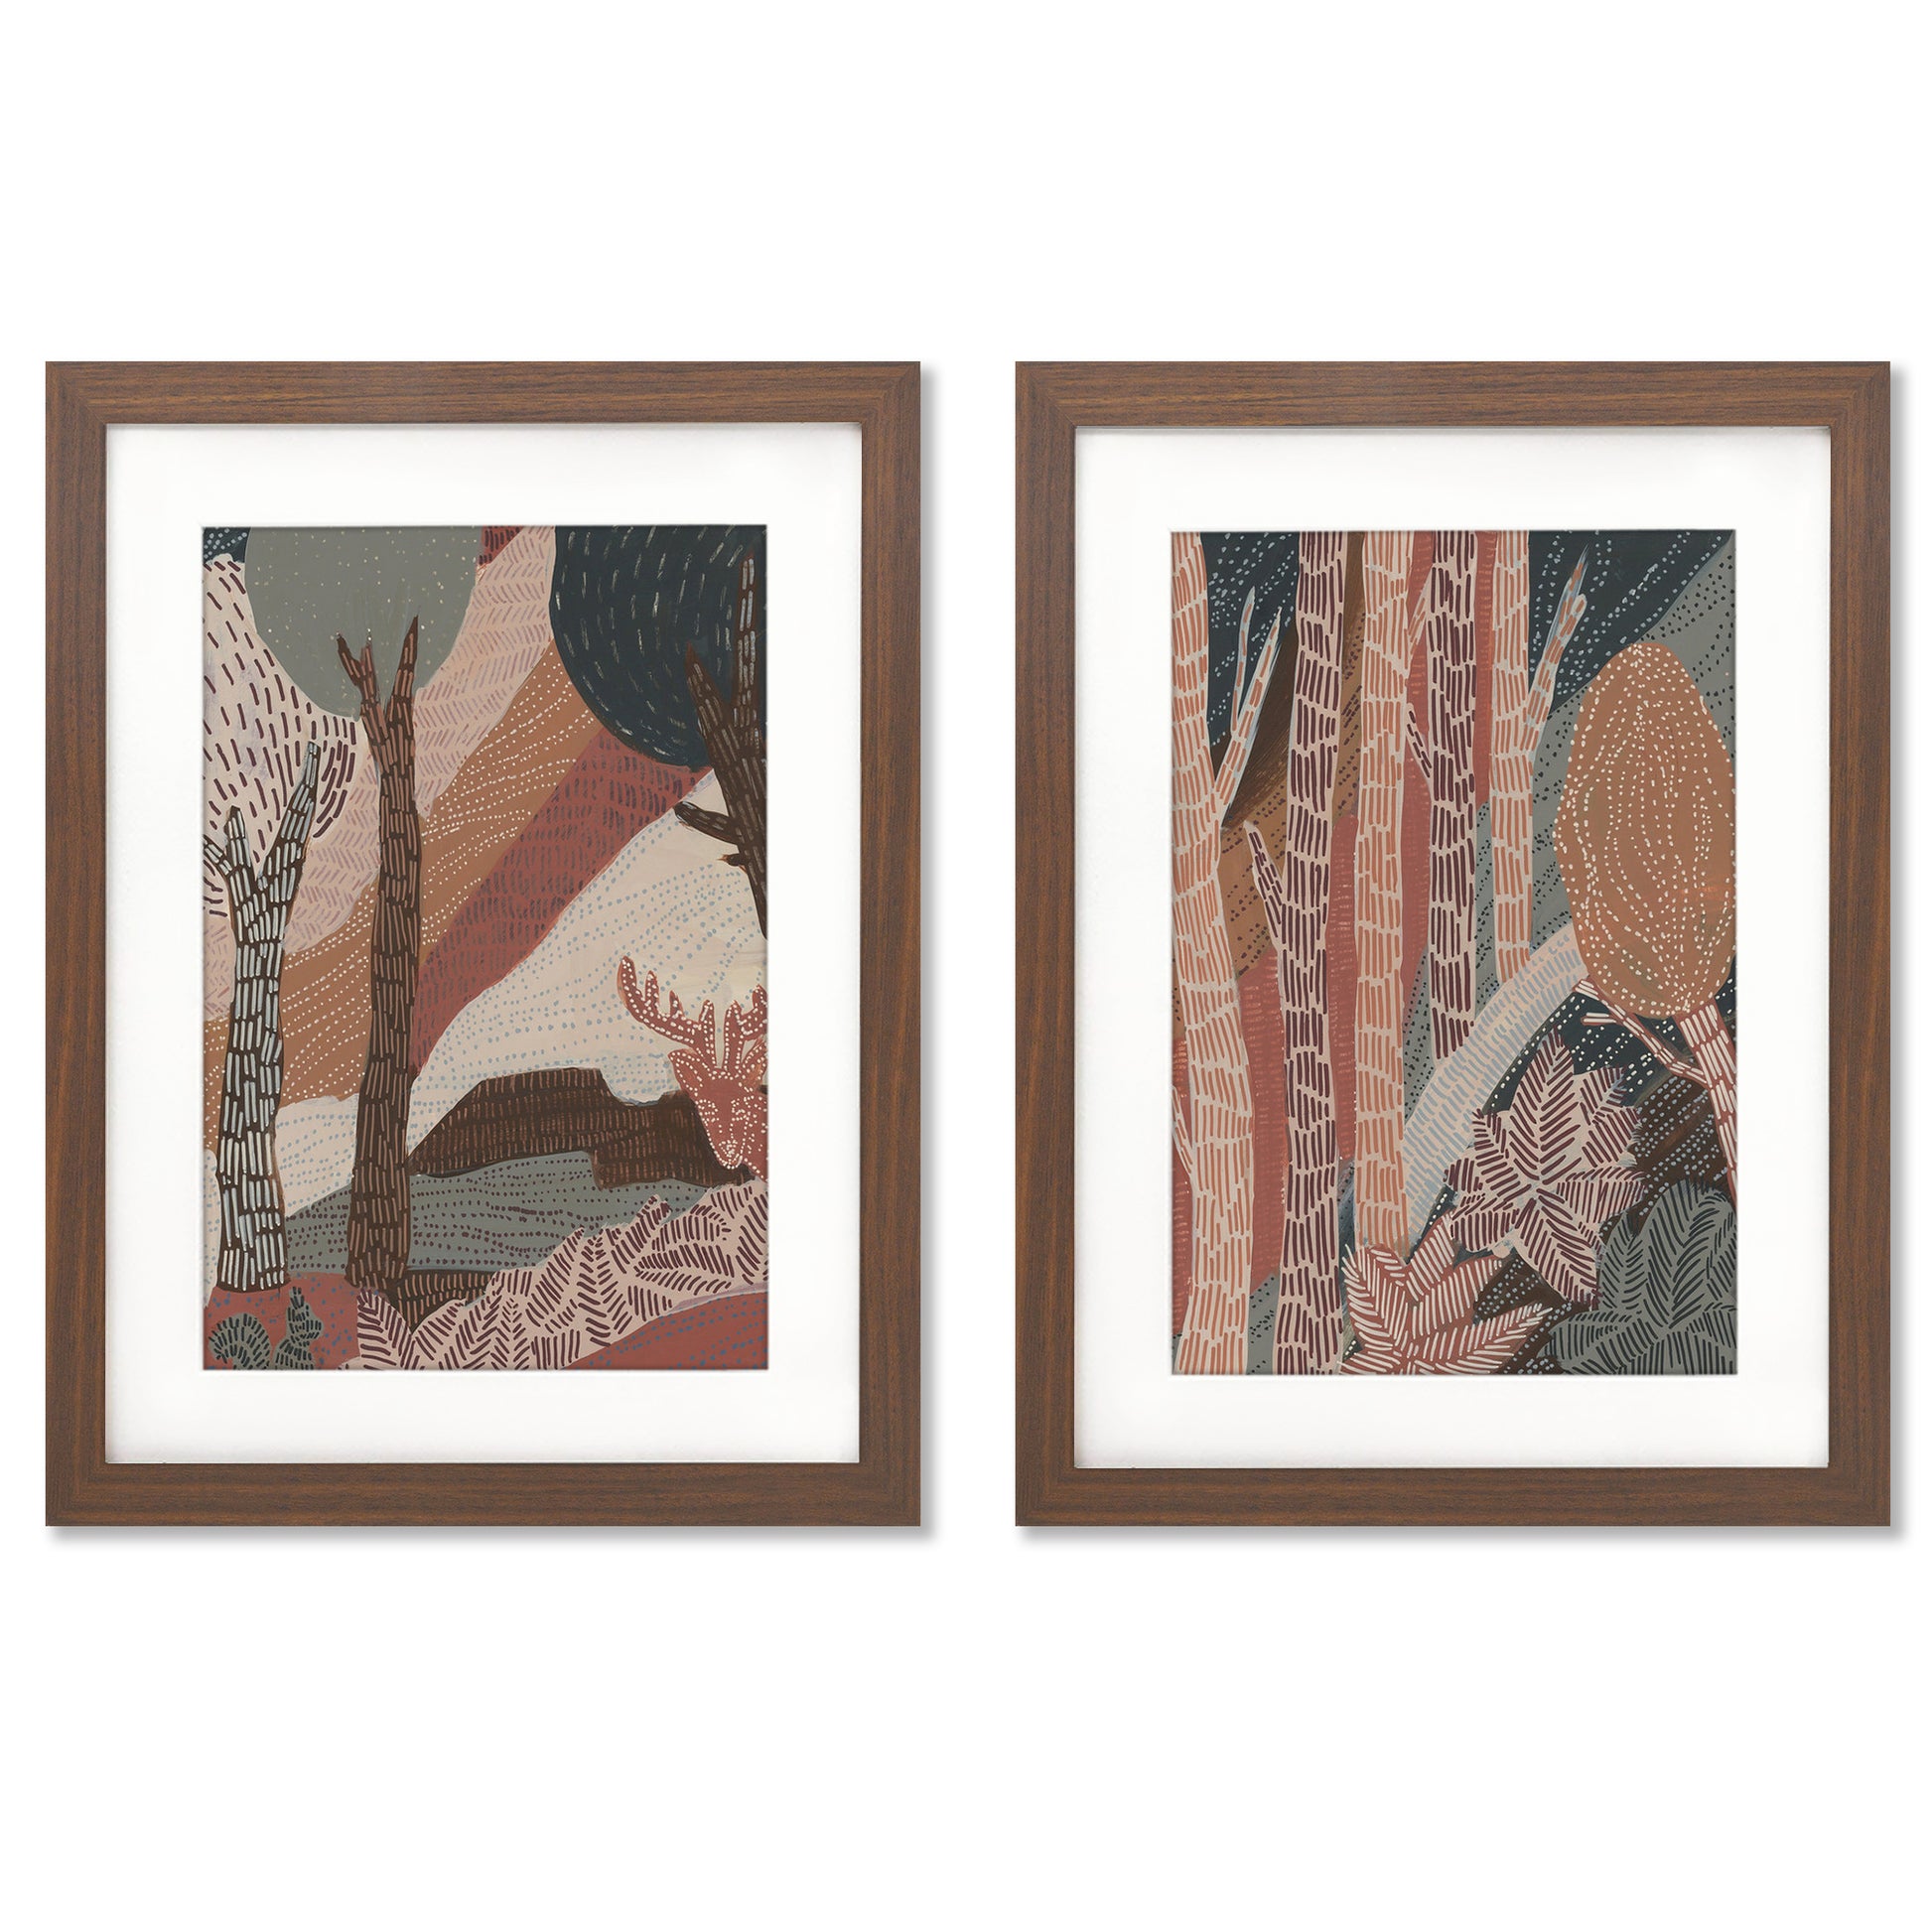 Nordic Woodlands by Jetty Home - 2 Piece Gallery Framed Print Art Set